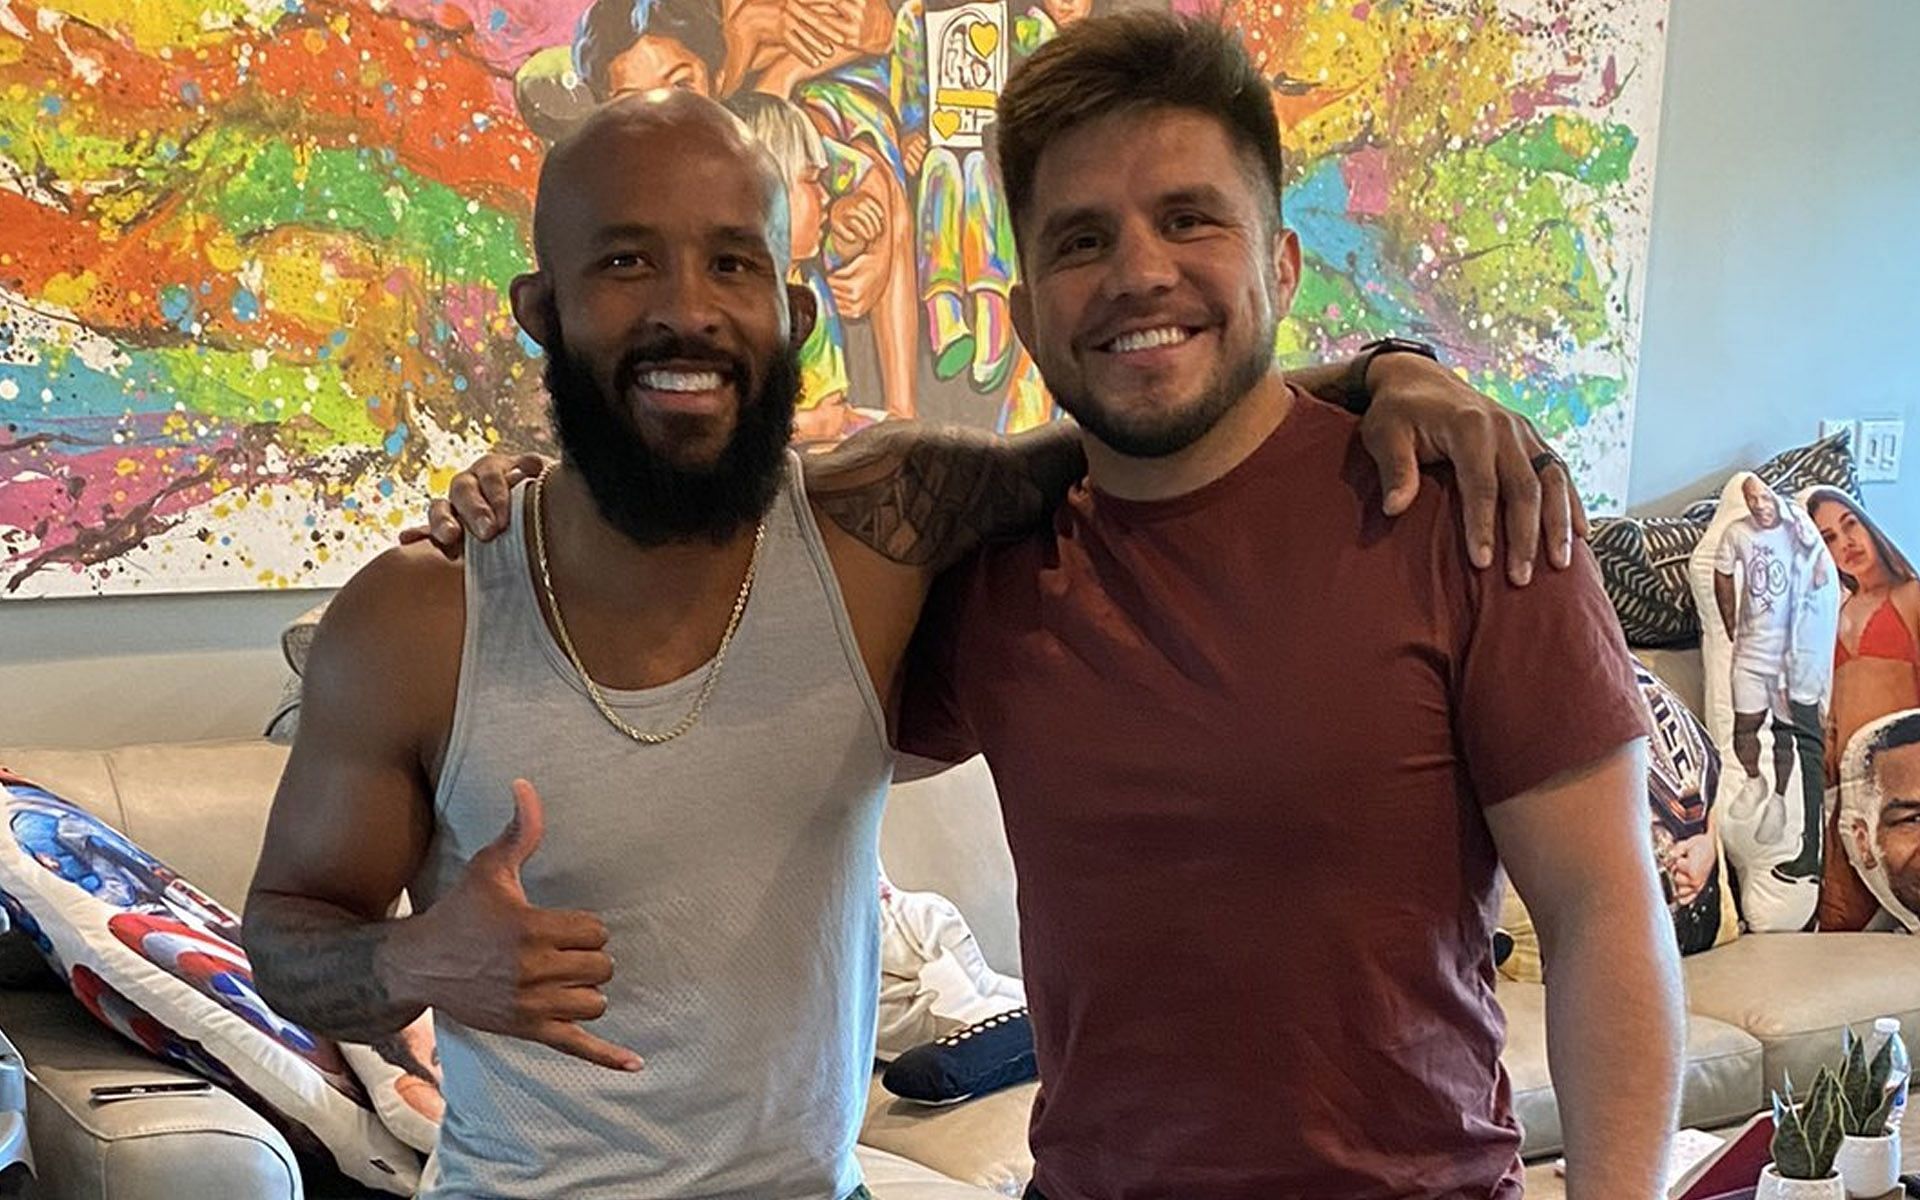 Demetrious Johnson (L) drops by &quot;the hacienda&quot; of Henry Cejudo (R) to look back at old times. [Photo: @HenryCejudo on Twitter]